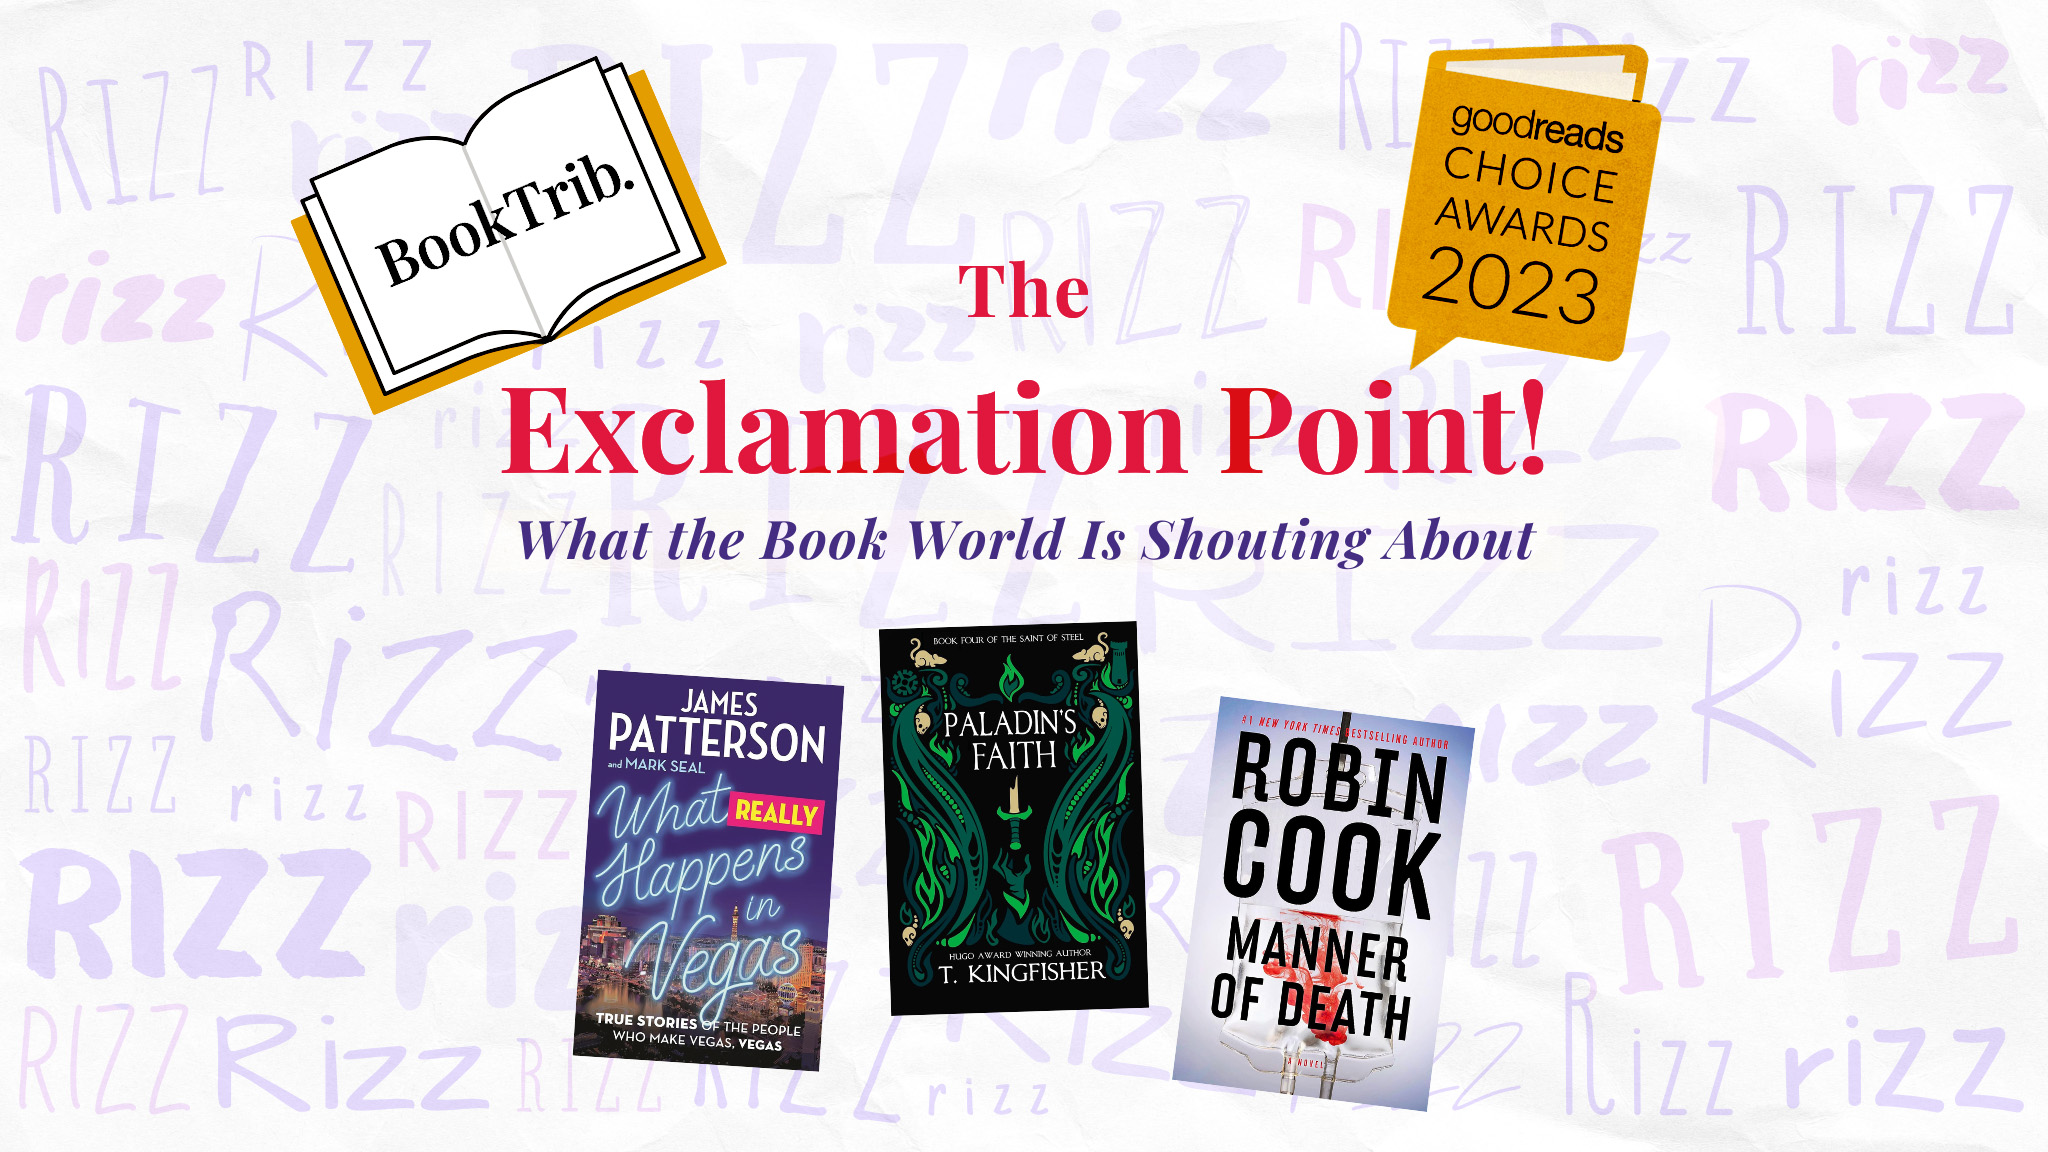 The Exclamation Point! | BookTrib